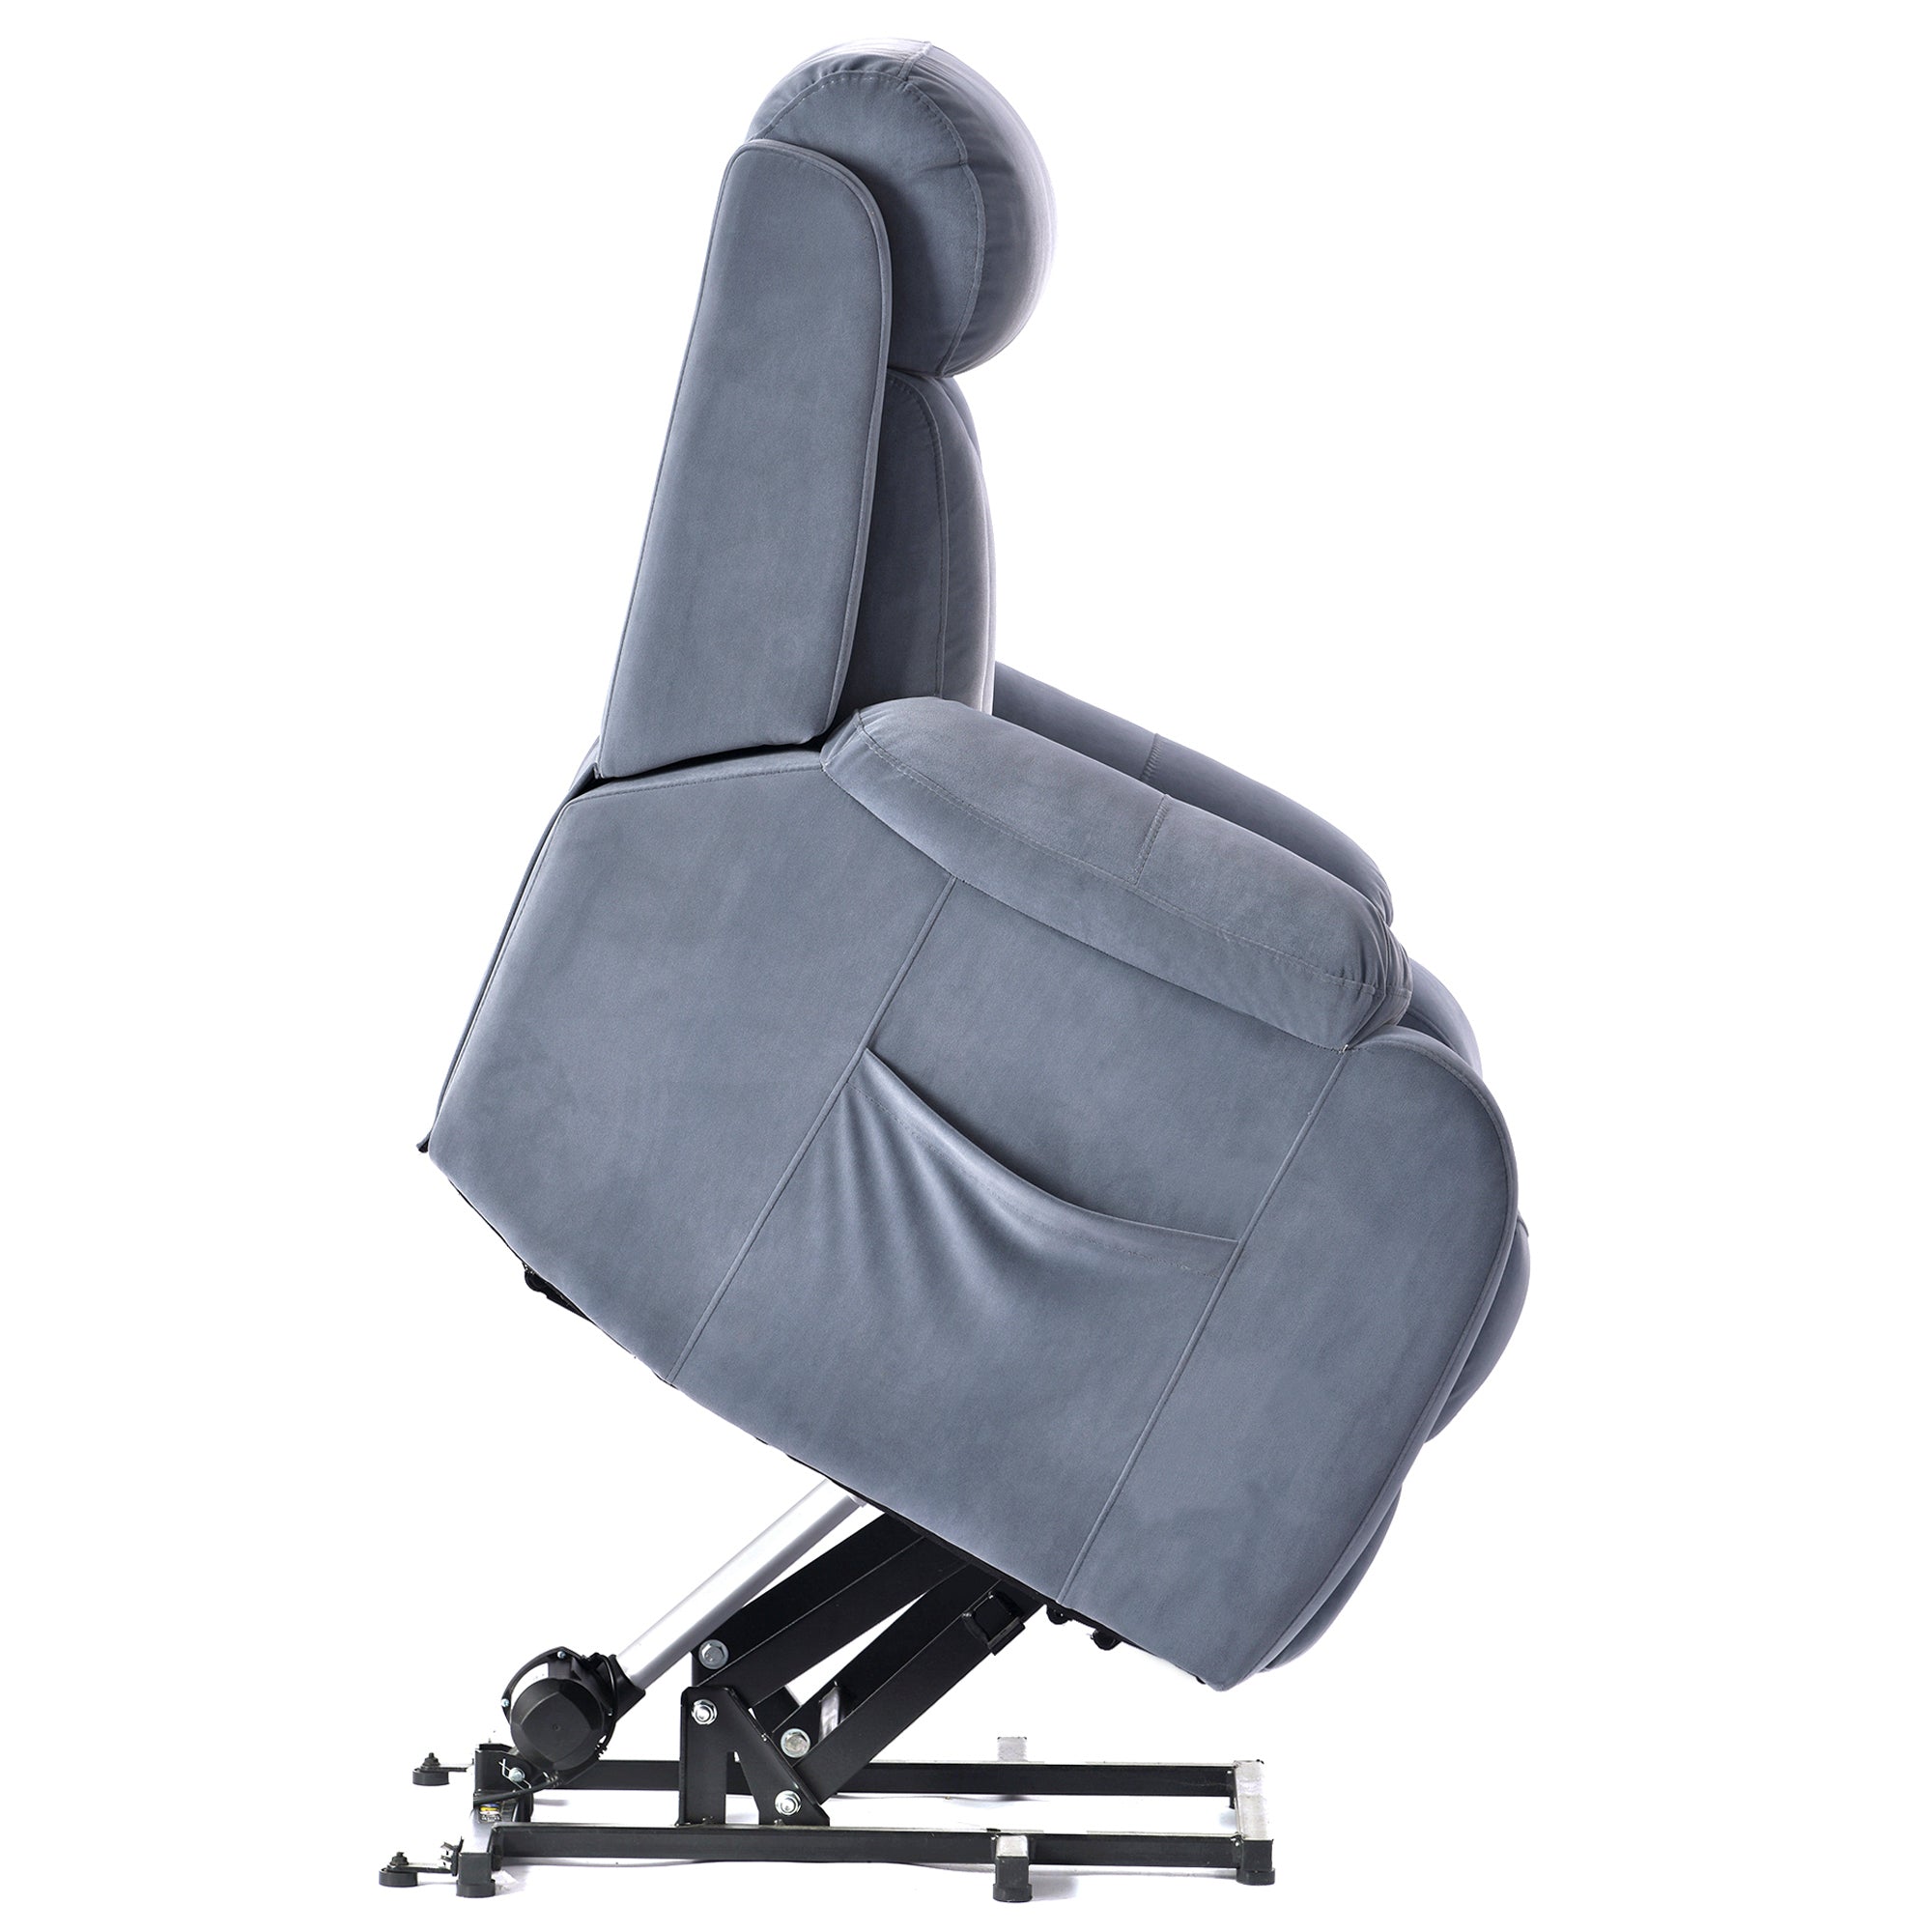 Lifted side view of power lift chair recliner